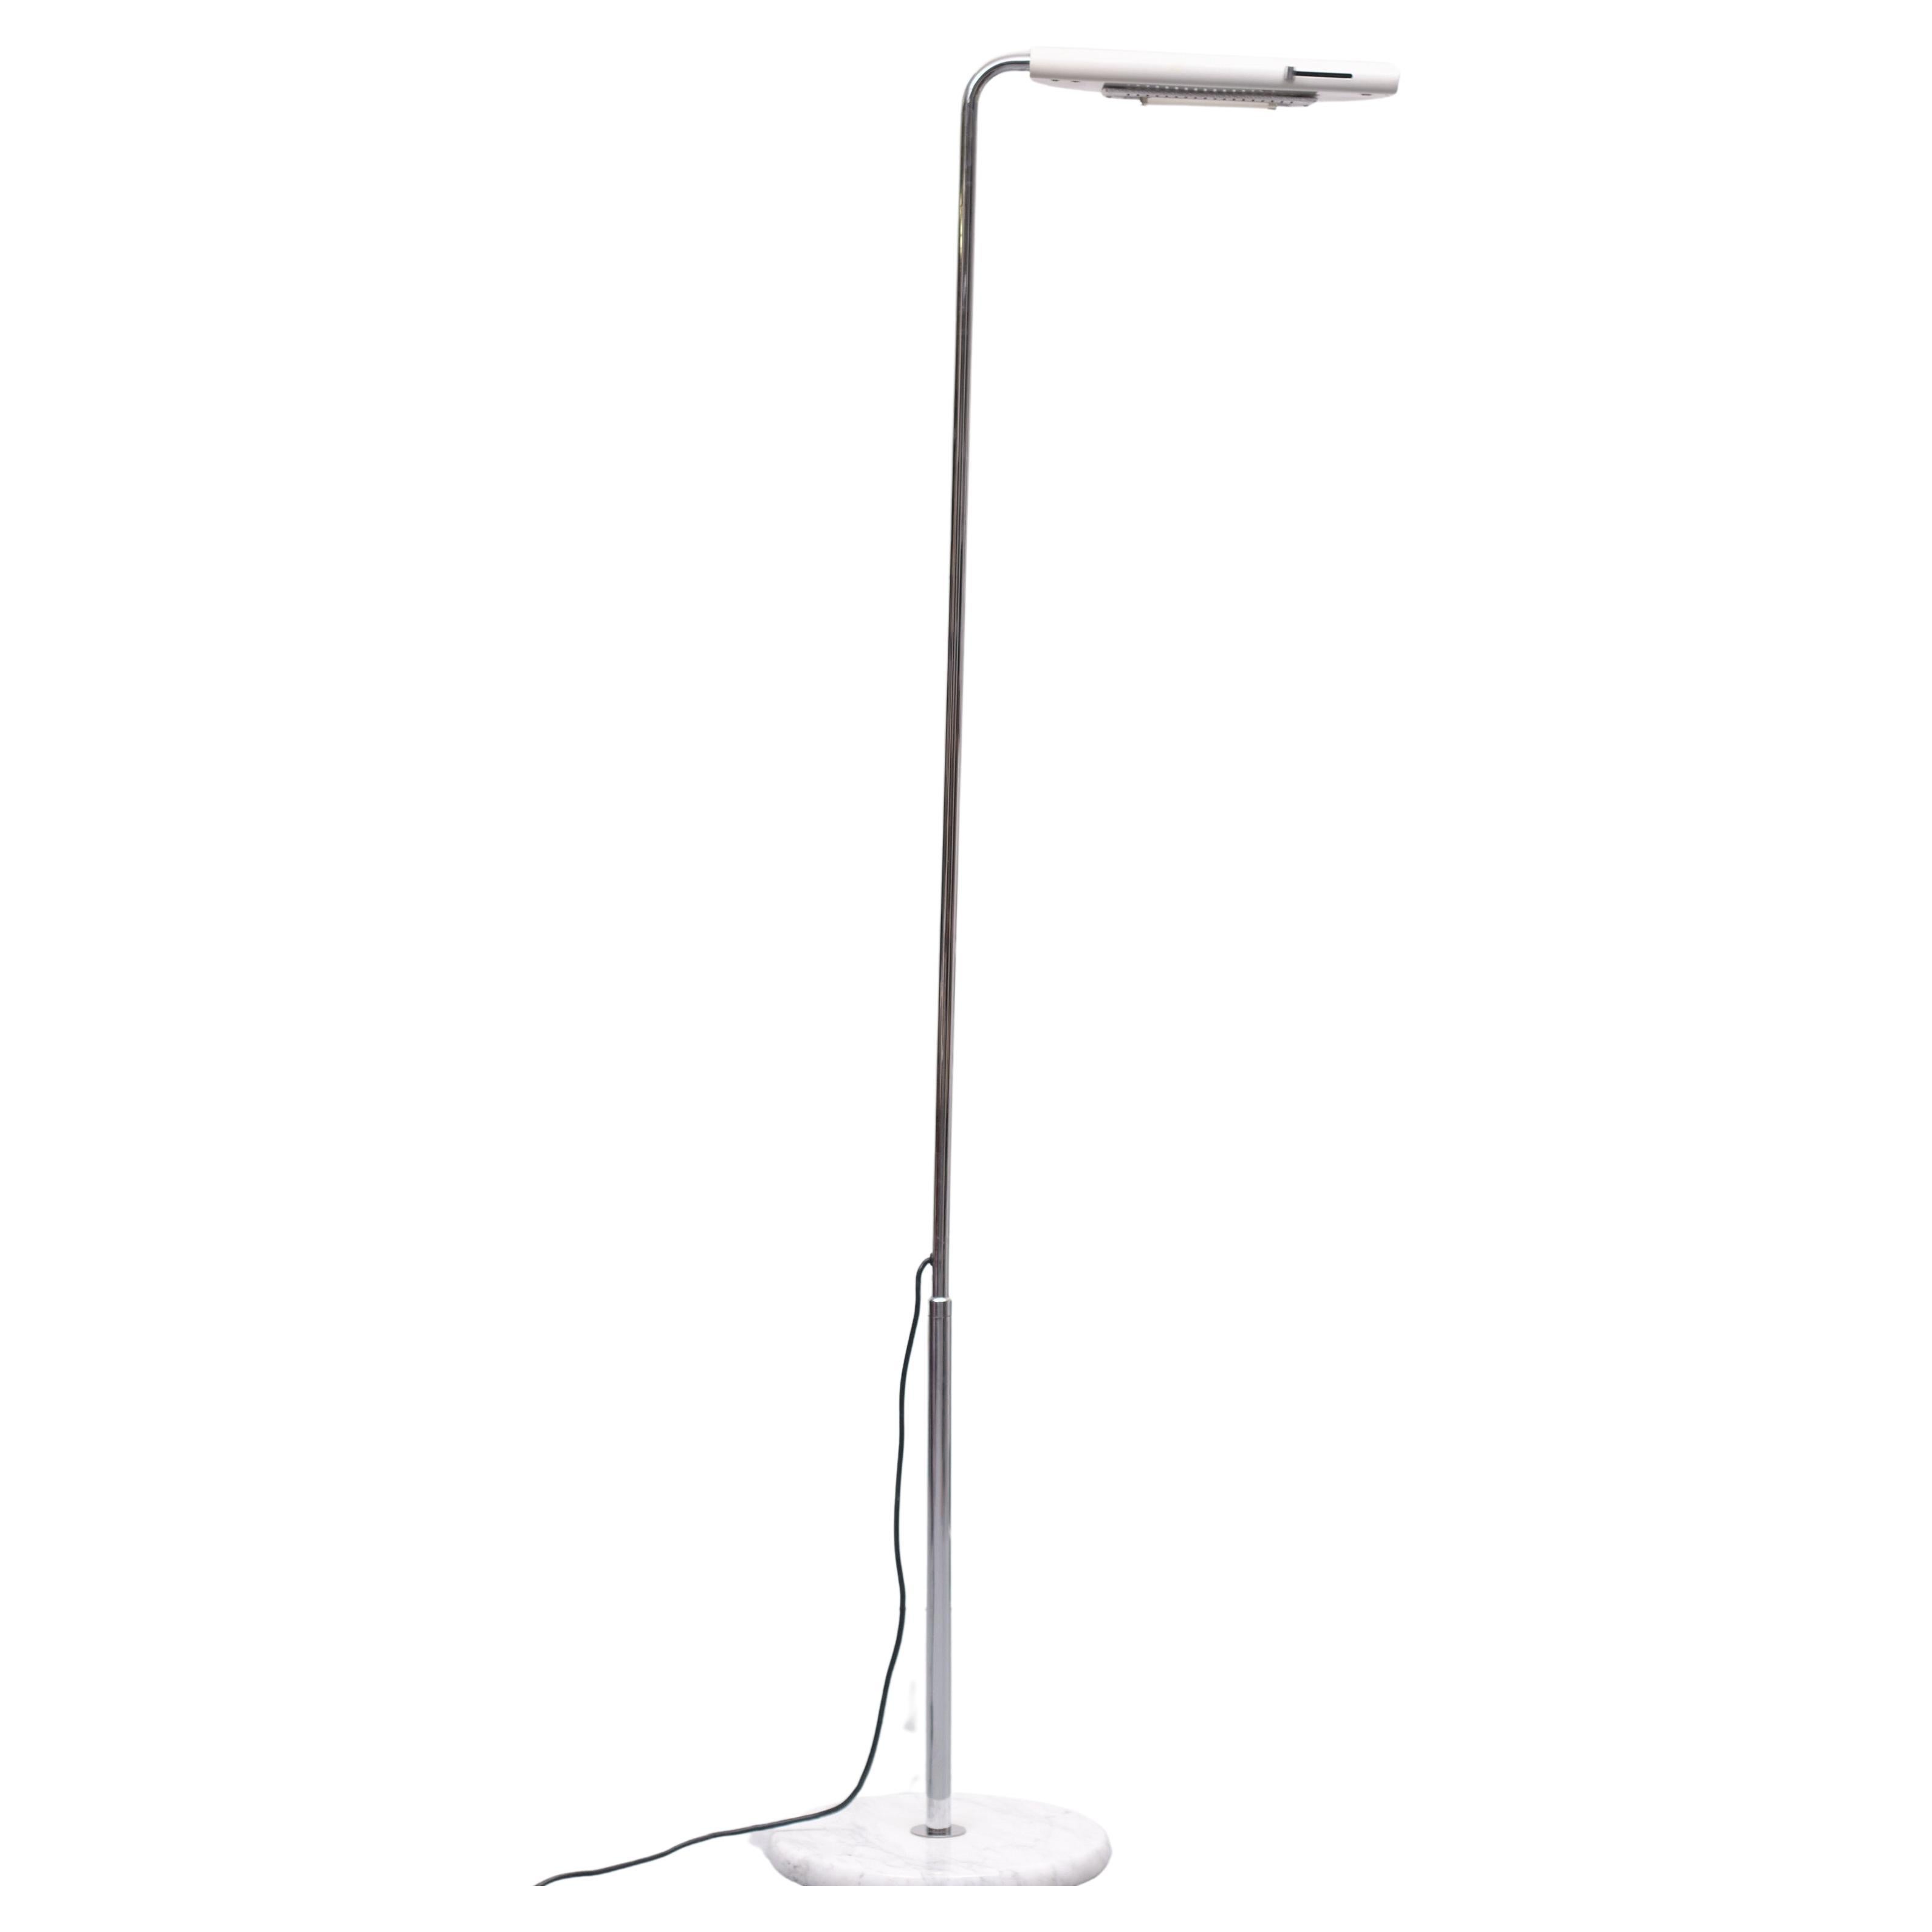 This Italian floor lamp, model Mezzaluna, was designed by Bruno Gecchelin in 1974 and produced by Skipper and Pollux in Milano. The floor lamp has a chrome-plated tubular steel structure, a white marble base, and White -enameled adjustable head. The